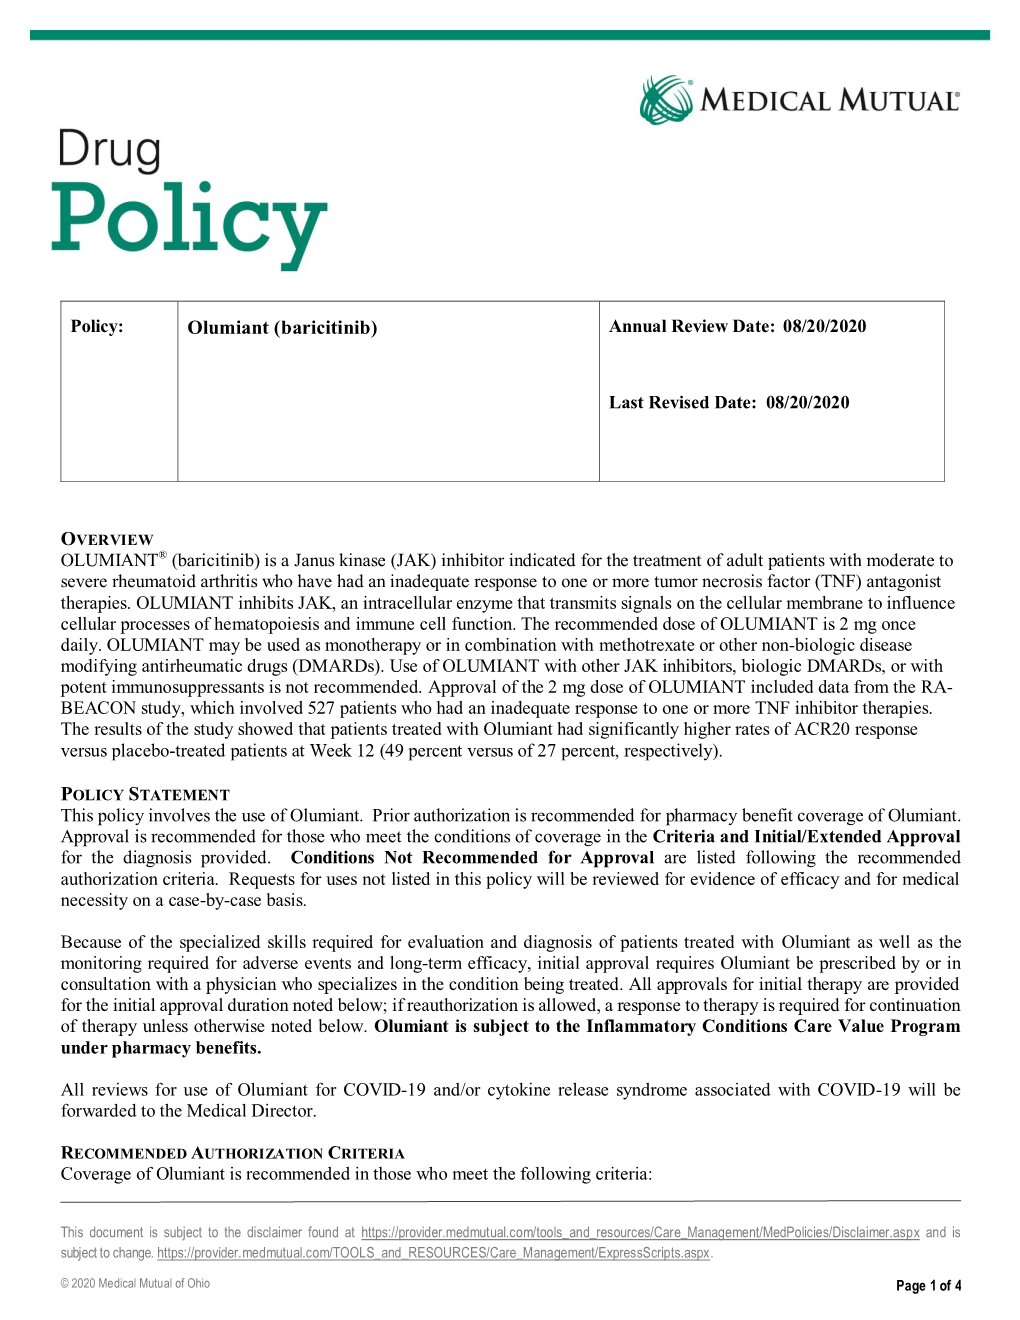 Olumiant (Baricitinib) Annual Review Date: 08/20/2020